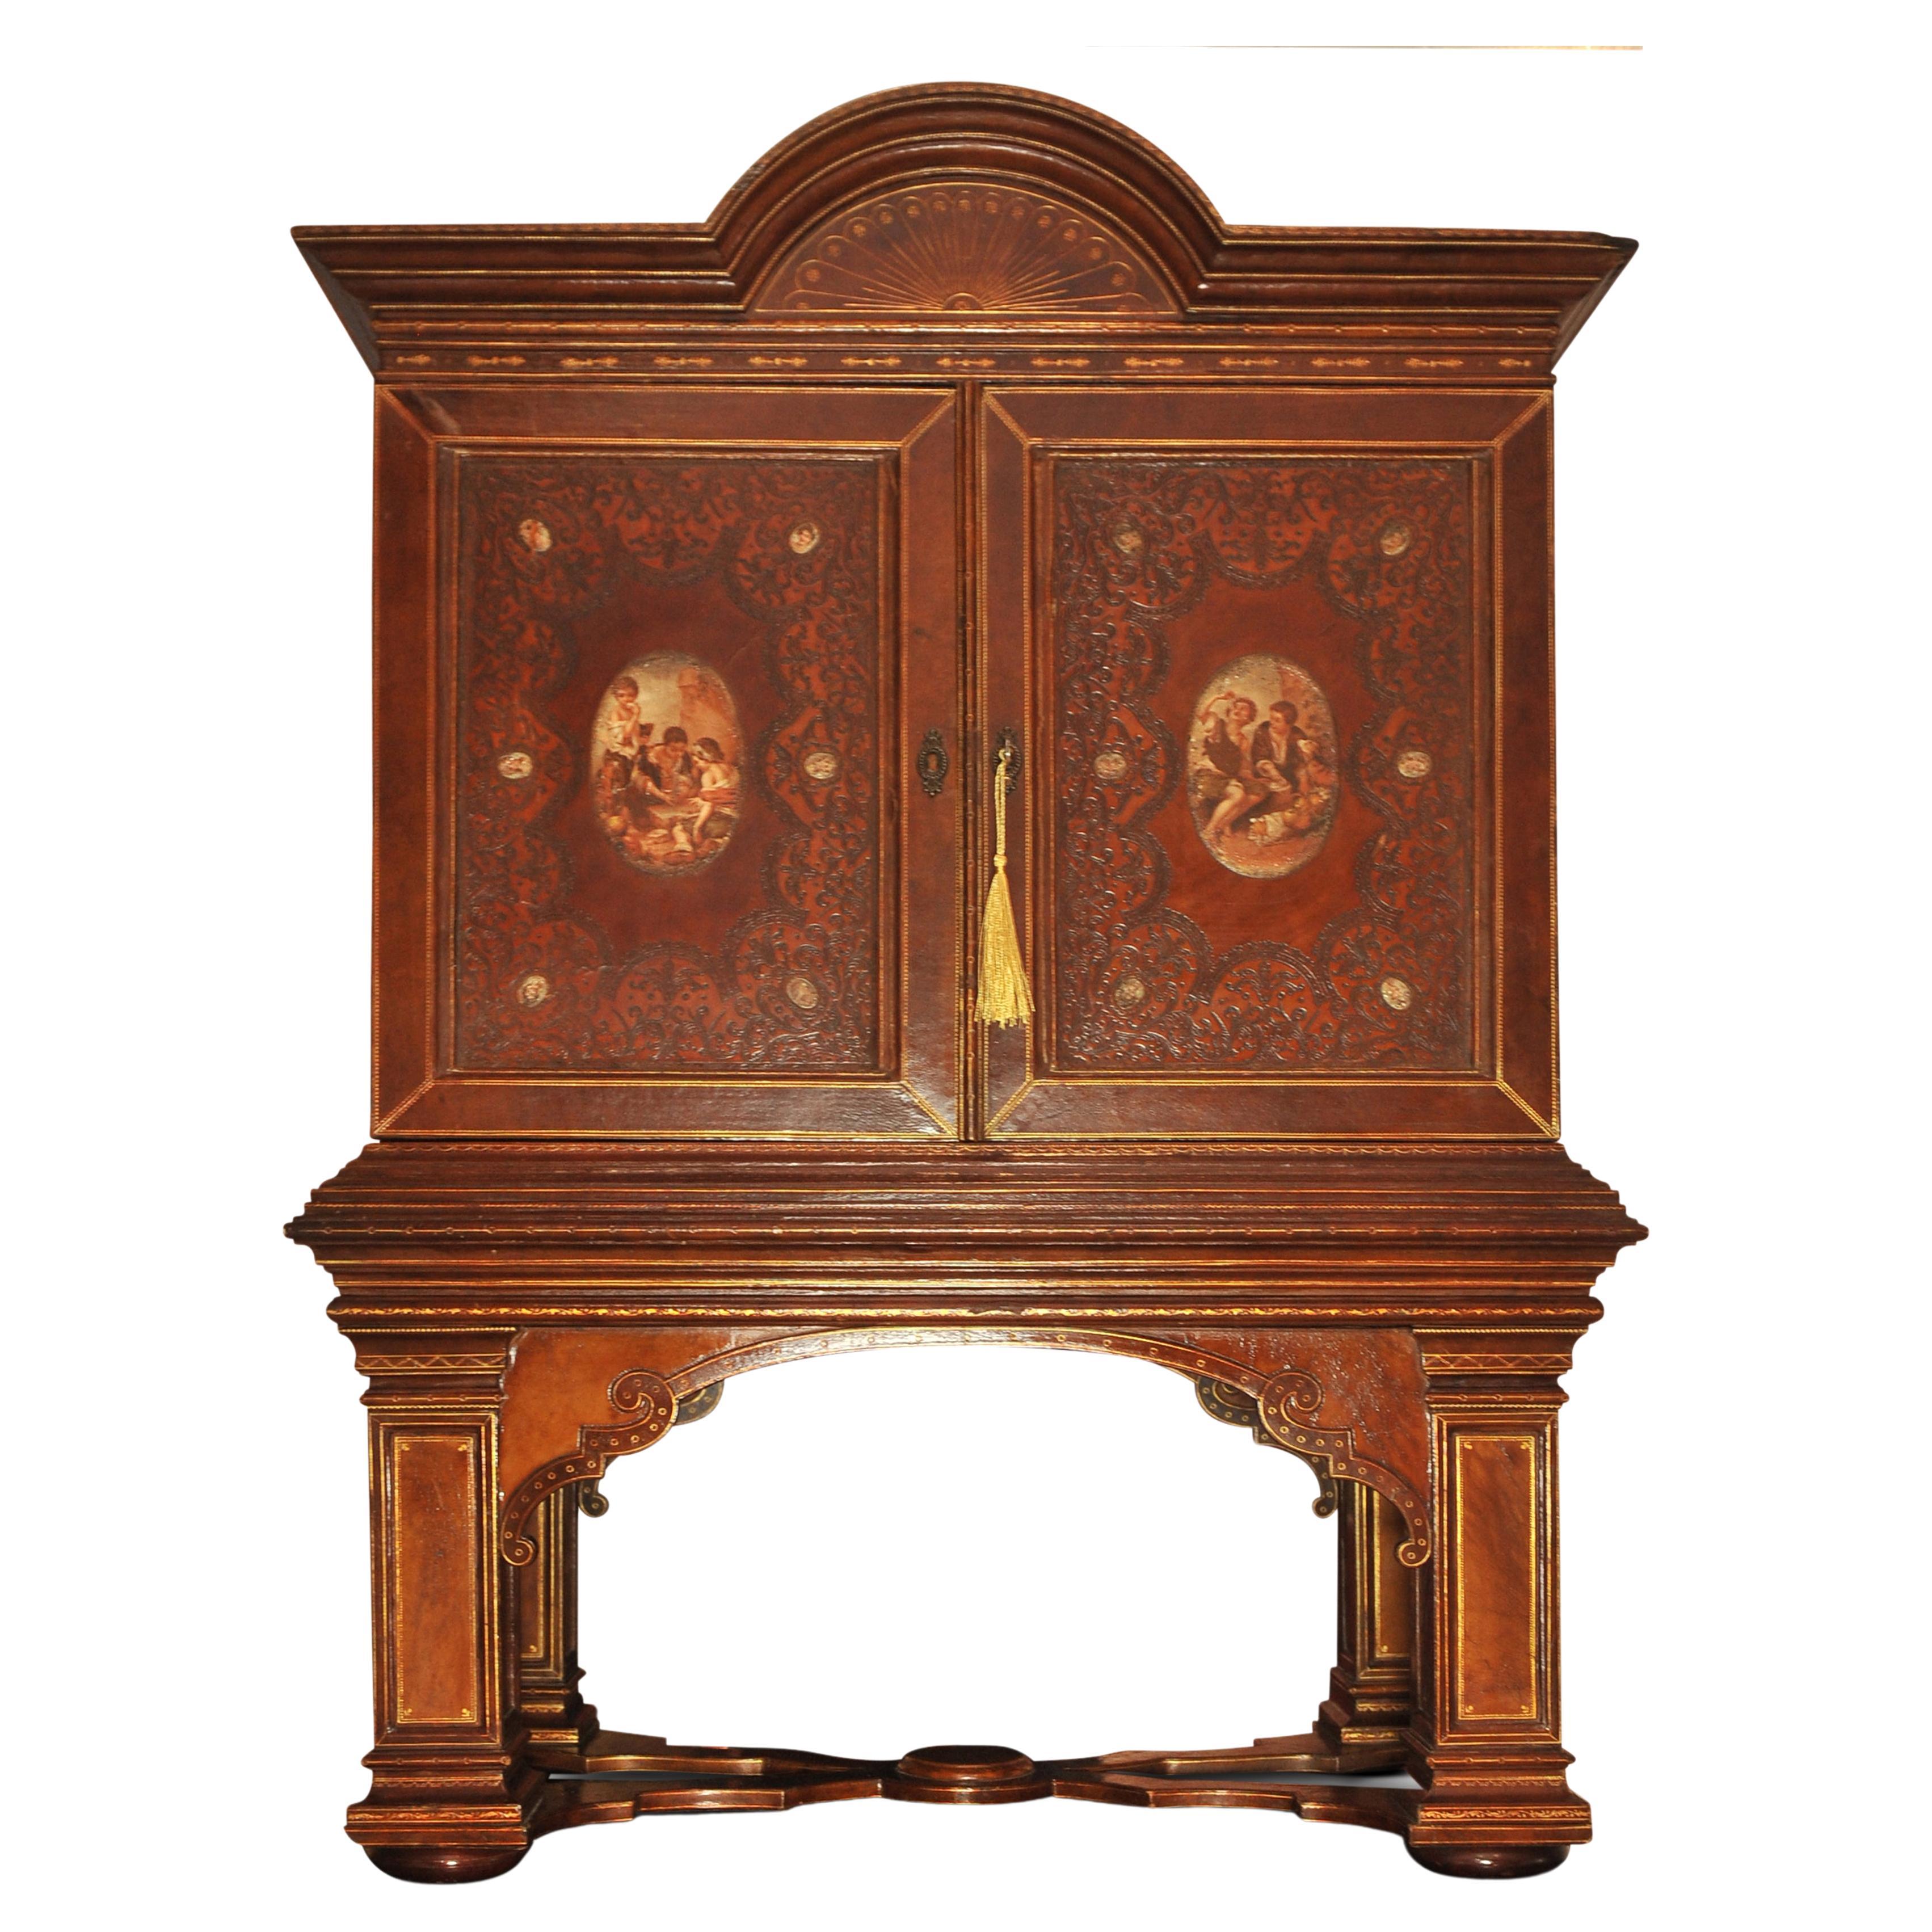 A 19th Century Handcrafted Tooled Brown Leather Italian Renaissance Design Fitted Writing Cabinet On Original Plinth

Featuring fourteen hand-painted portraits (after) Murillo, depicting day to day life.

The interior of the two door cabinet